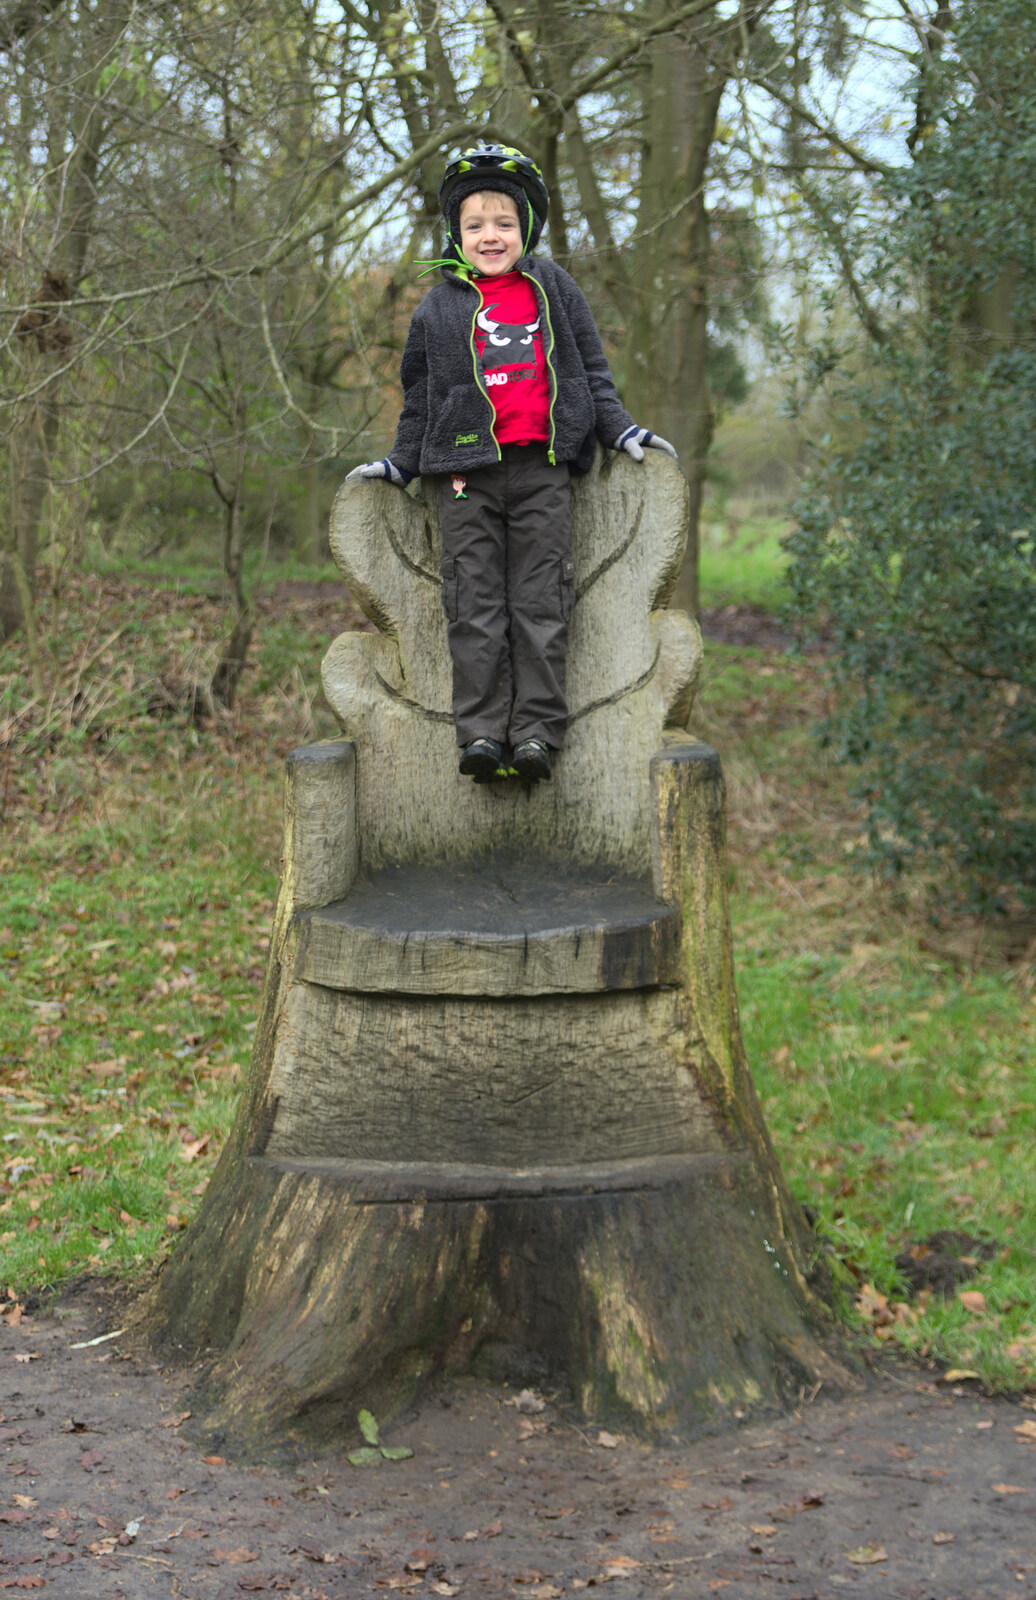 Fred floats in the air on the wooden throne from Cameraphone Randomness and a Thornham Walk, Suffolk - 14th December 2014